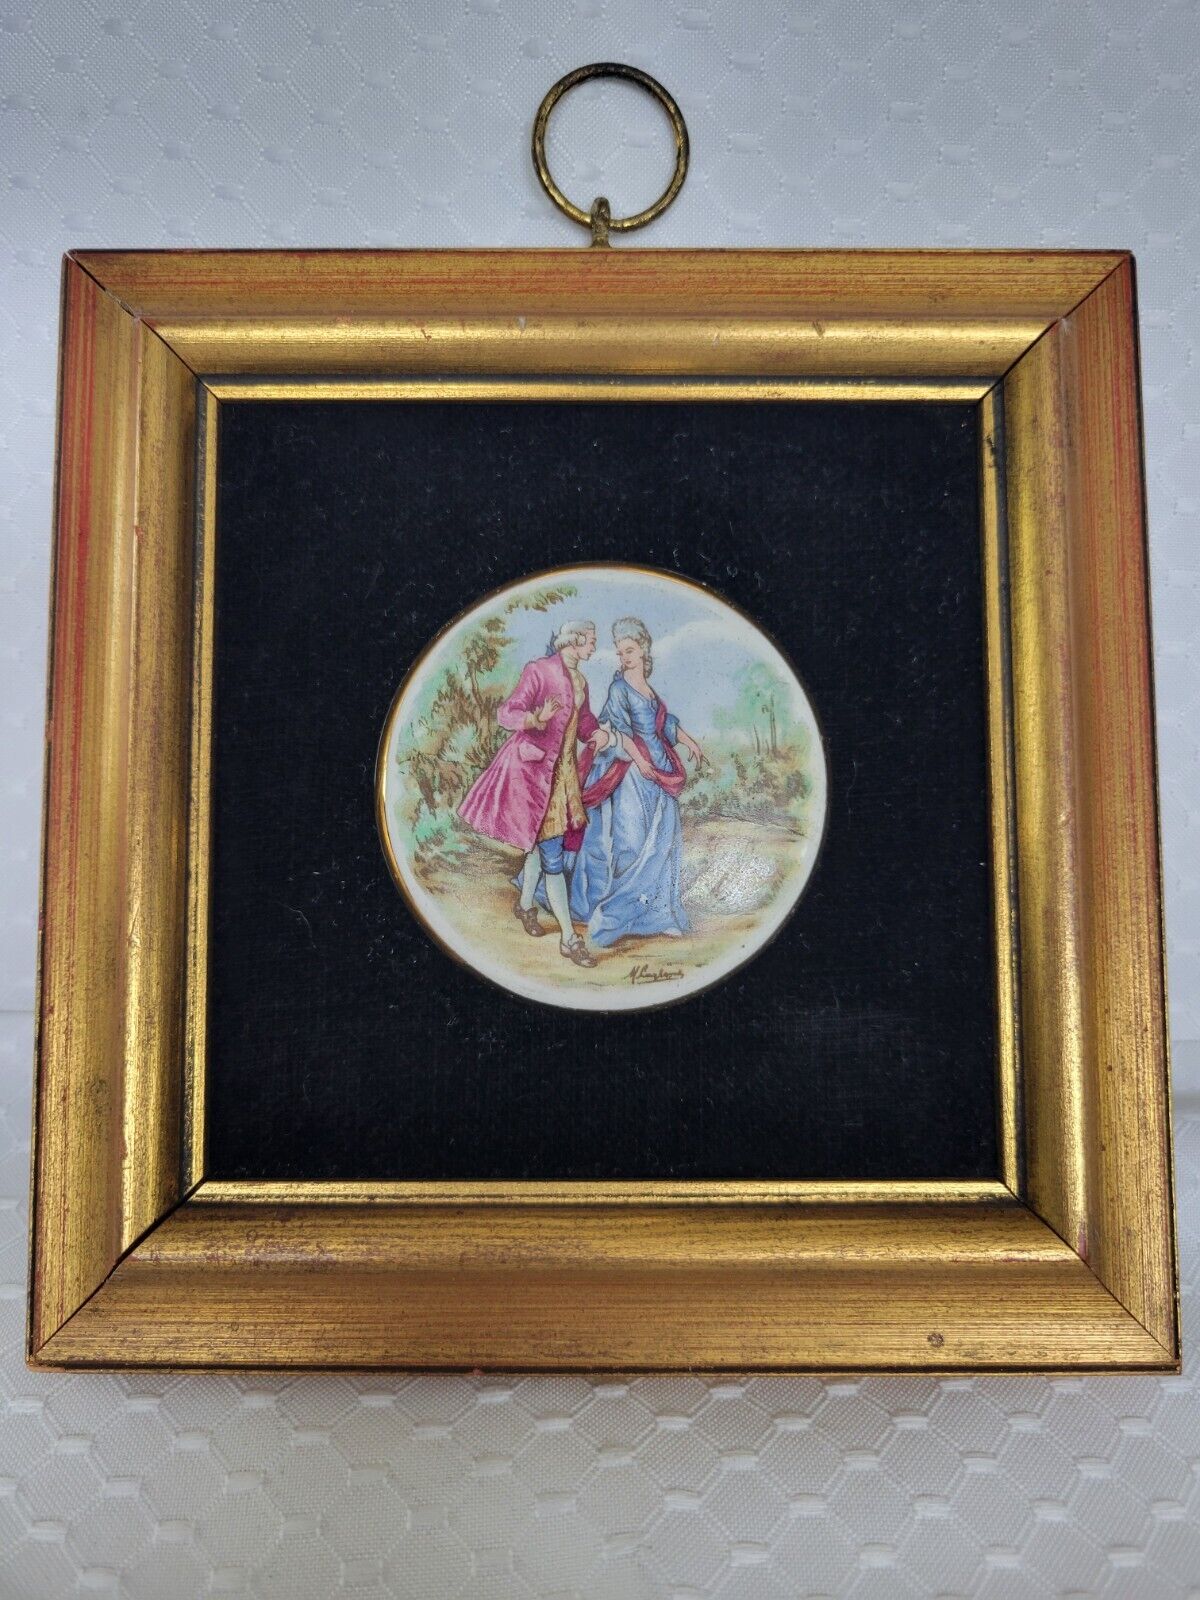 Vintage Beautiful Victorian Courting Cameo Framed on Black Velvet. Size 6x6.